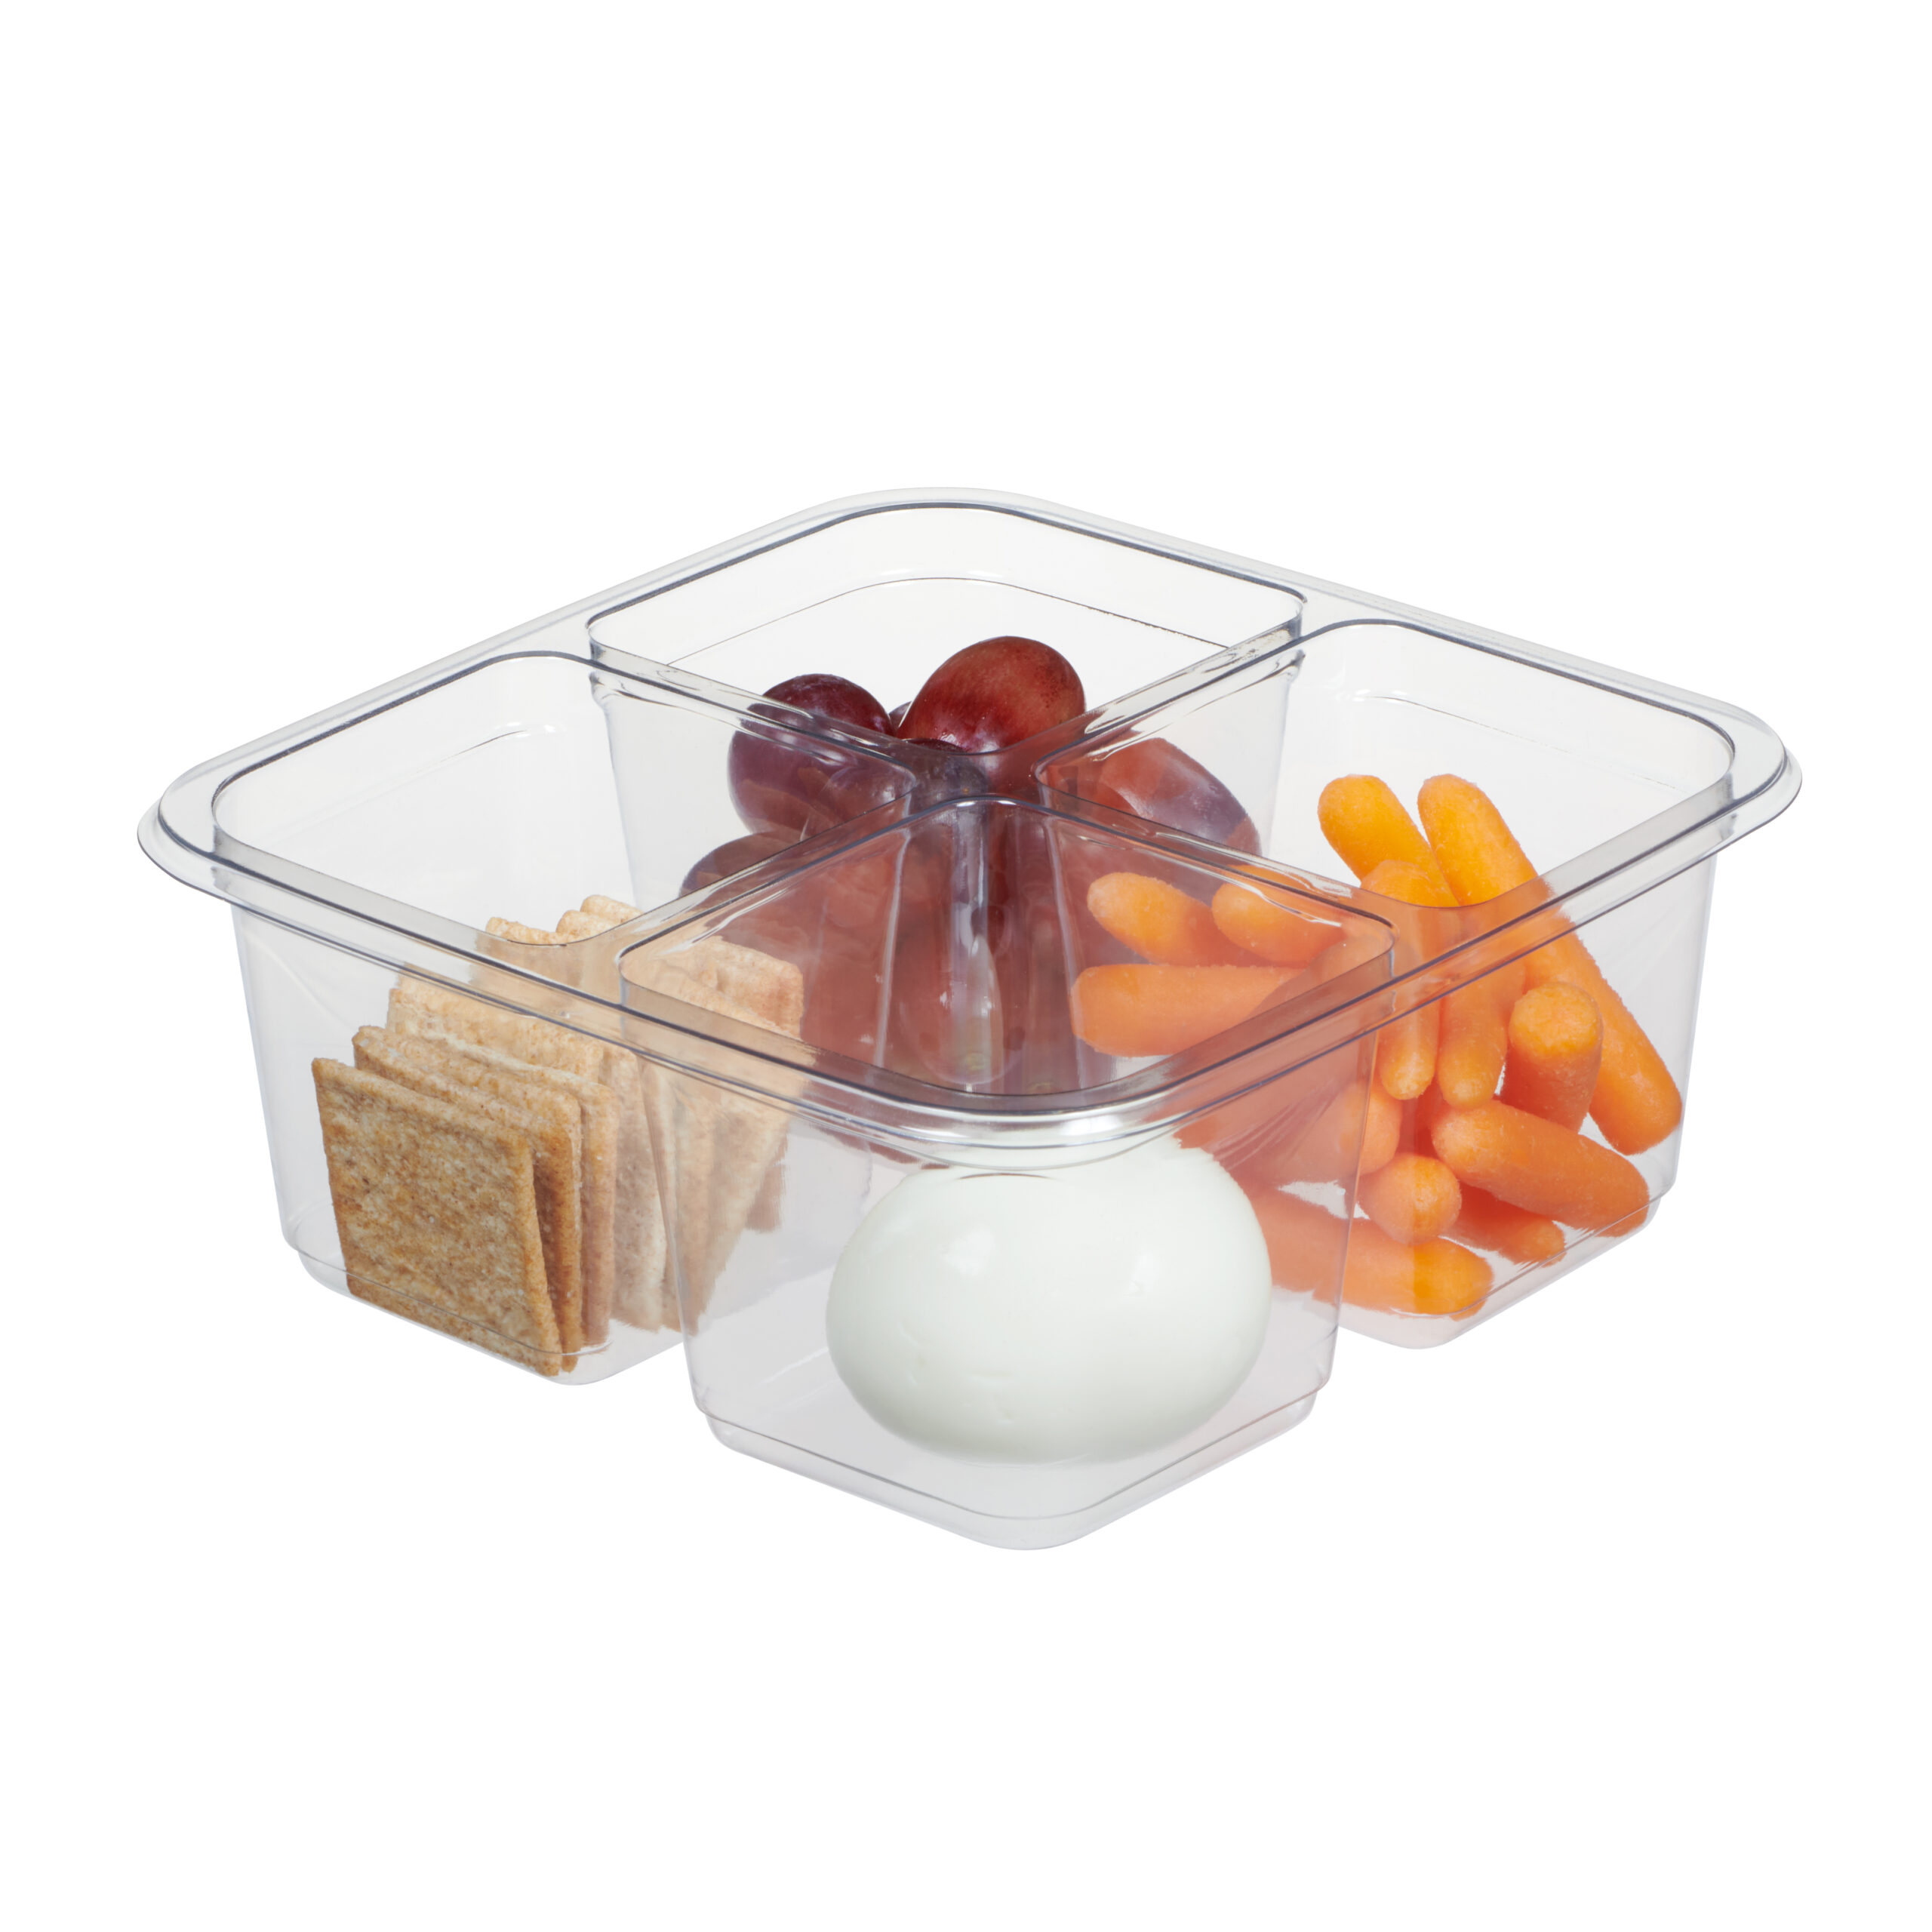 Clear plastic 4 compartment food tray with grapes, carrots, crackers and a hard-boiled egg